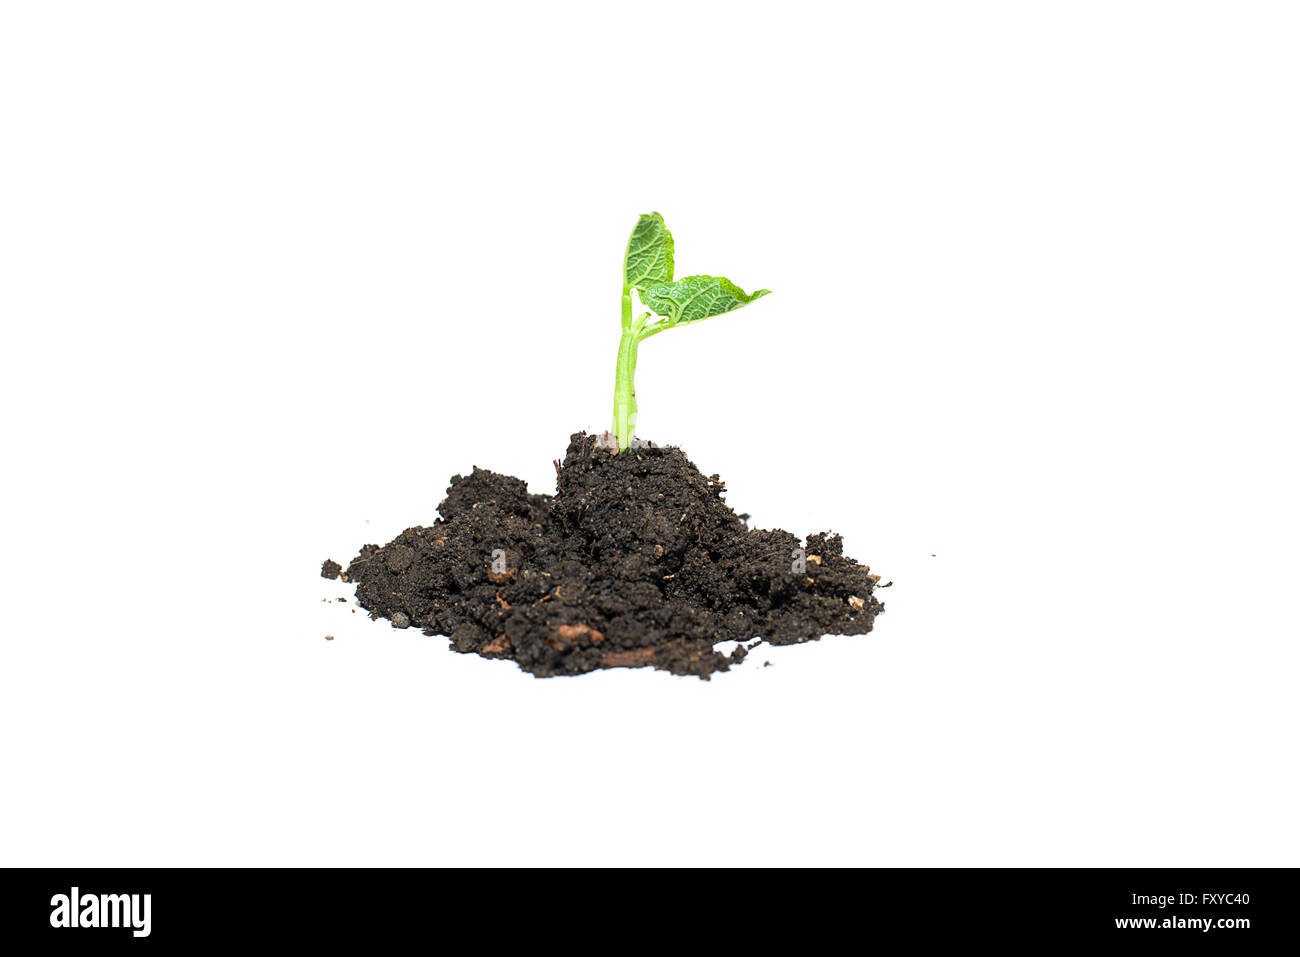 Green plants sprout up from the ground pile Stock Photo